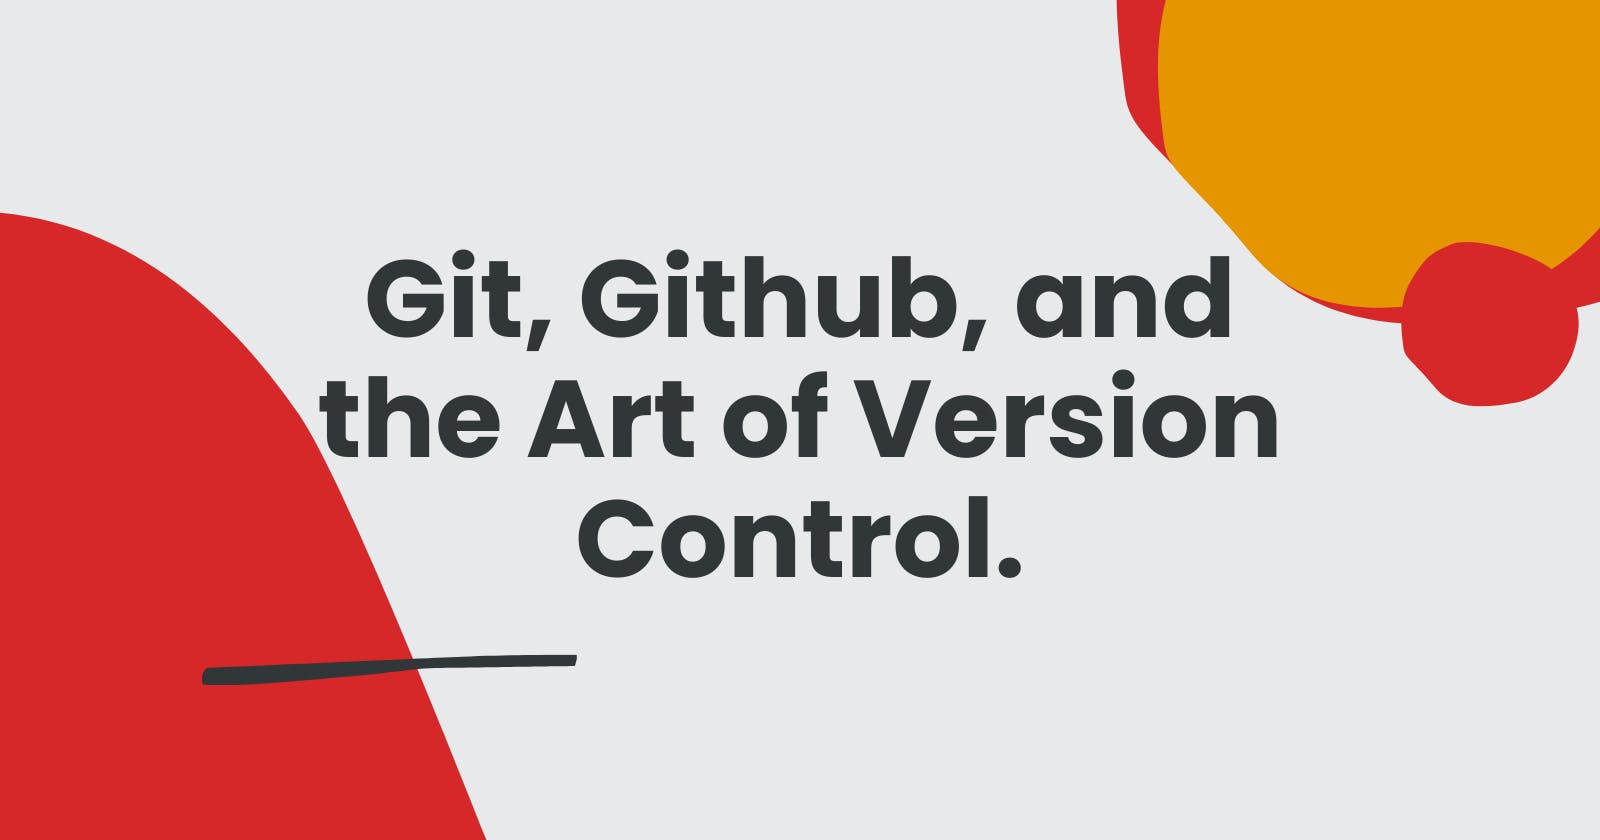 Git, GitHub, and the Art of Version Control